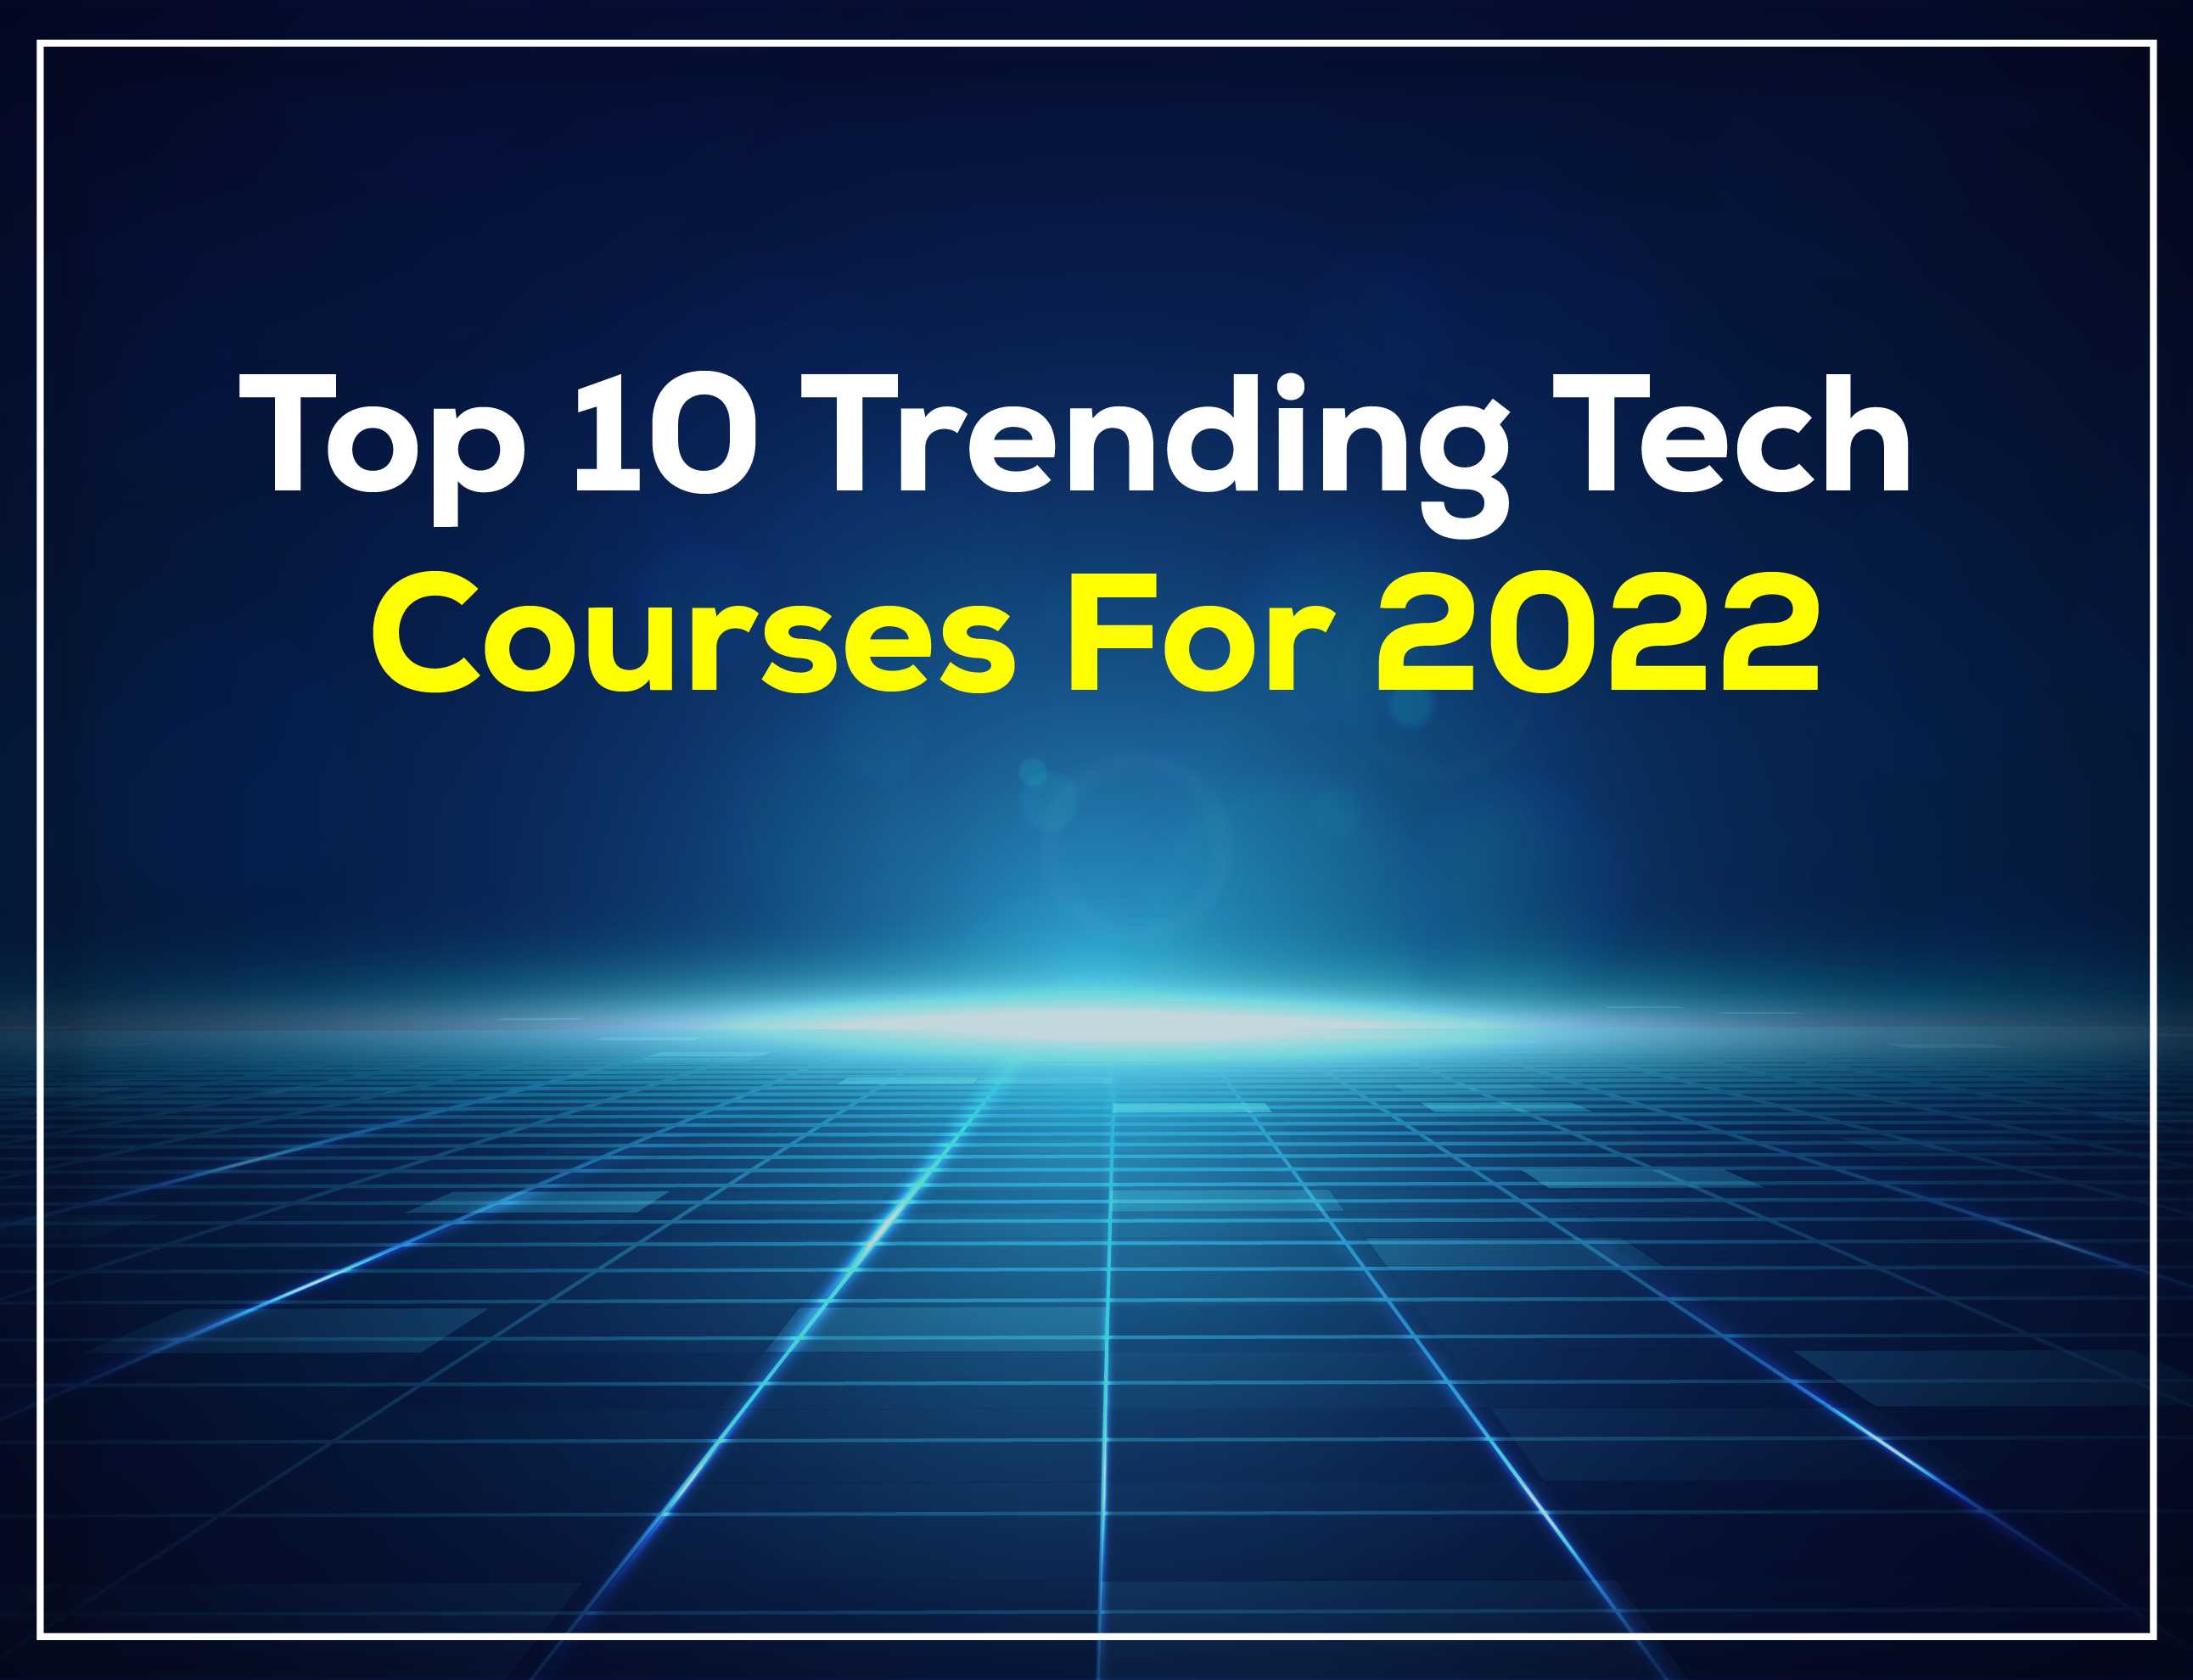 Top 10 Trending Tech Courses for 2022.